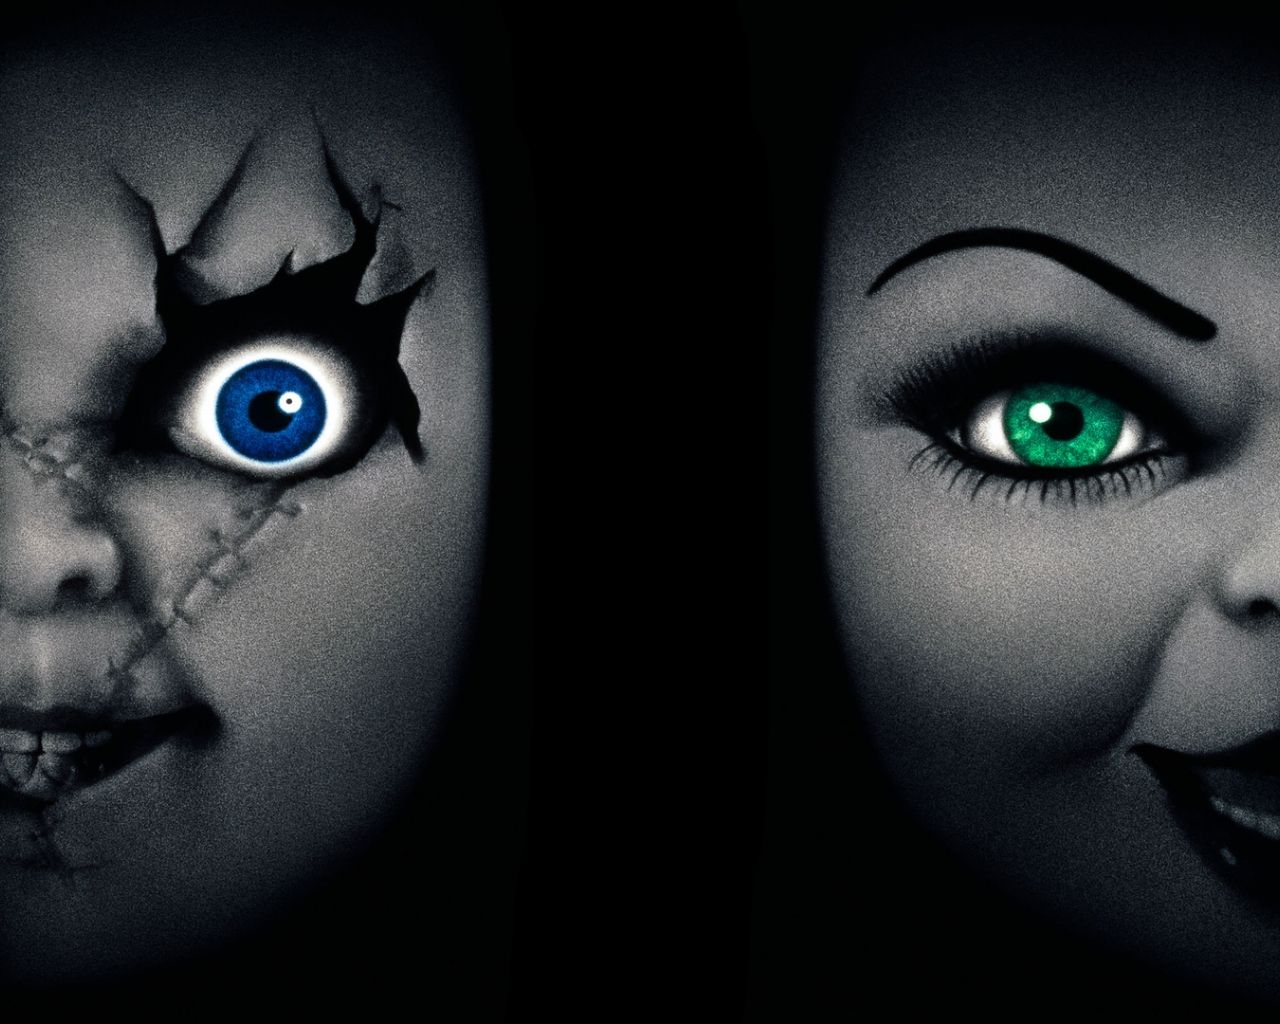 Download Tiffany vs Chucky Wallpapers Free for Android  Tiffany vs Chucky  Wallpapers APK Download  STEPrimocom